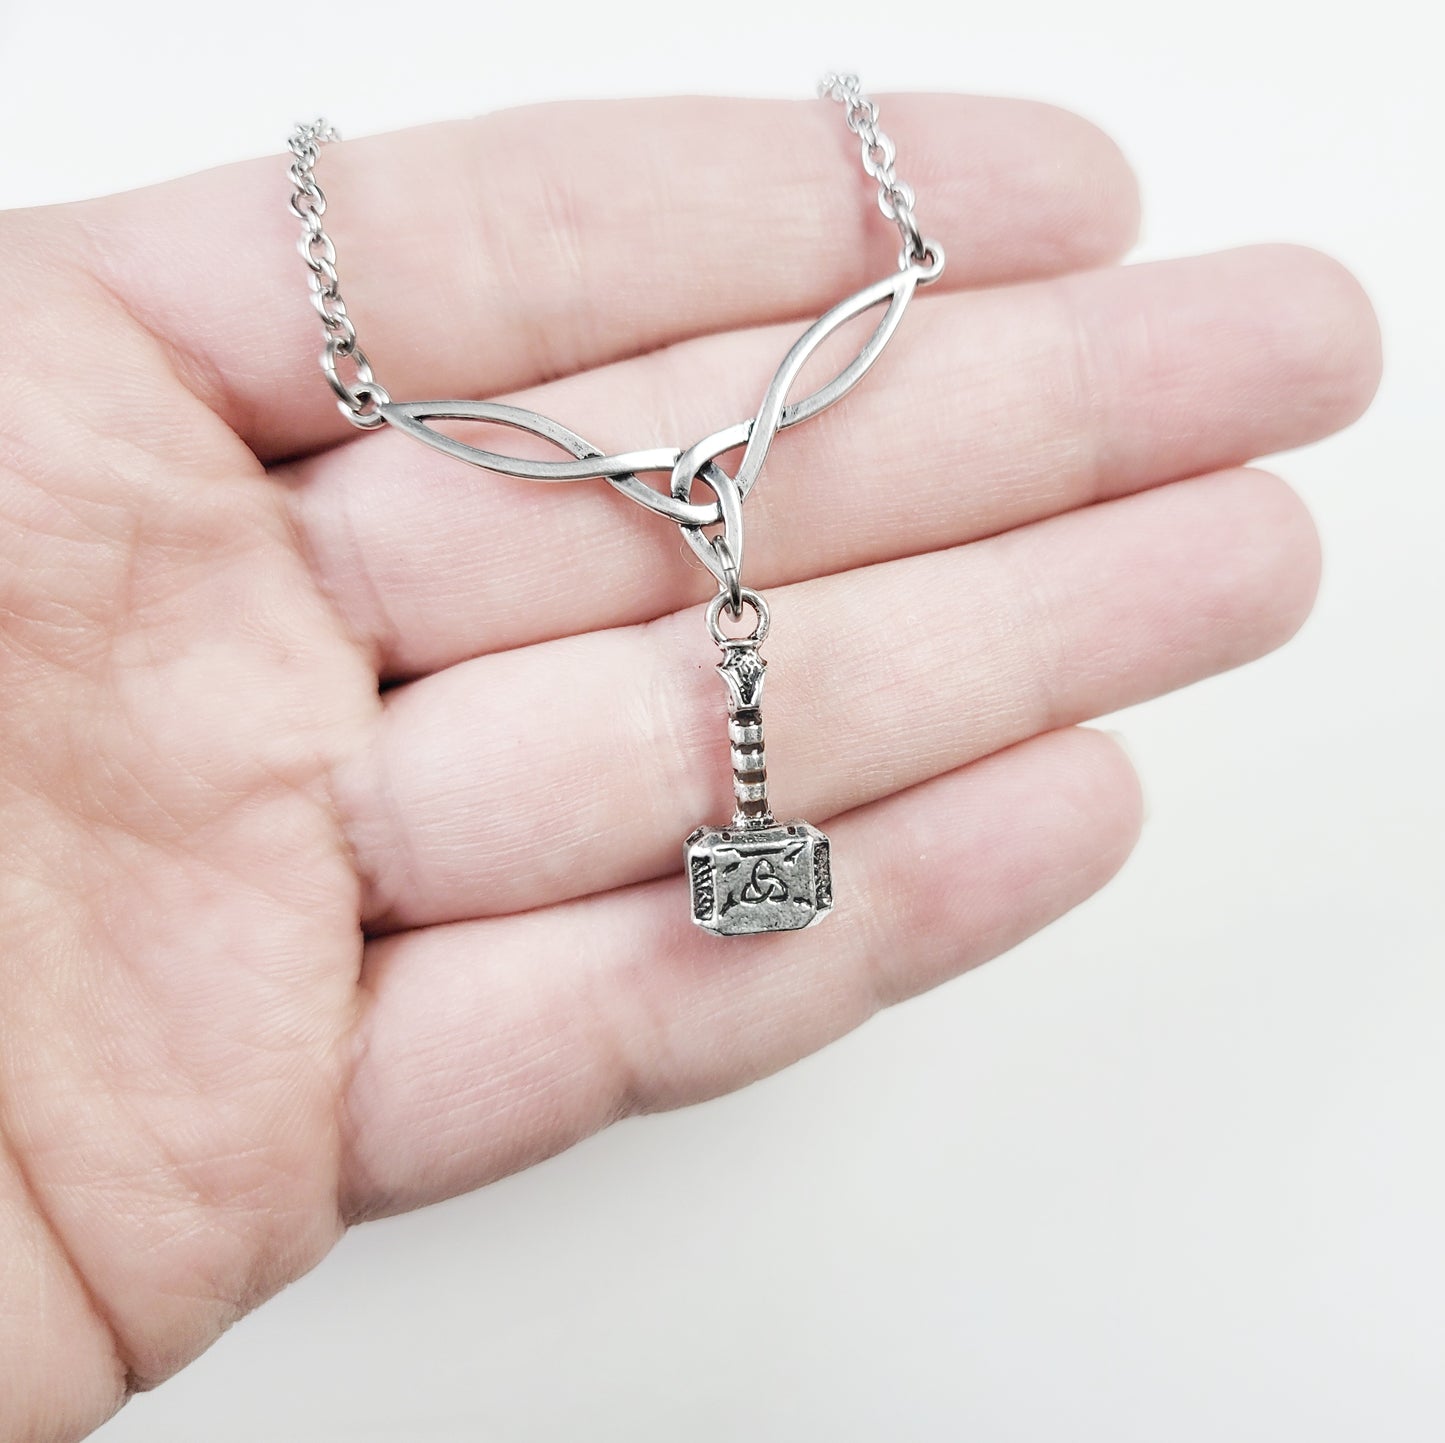 Celtic Thor's Hammer Necklace